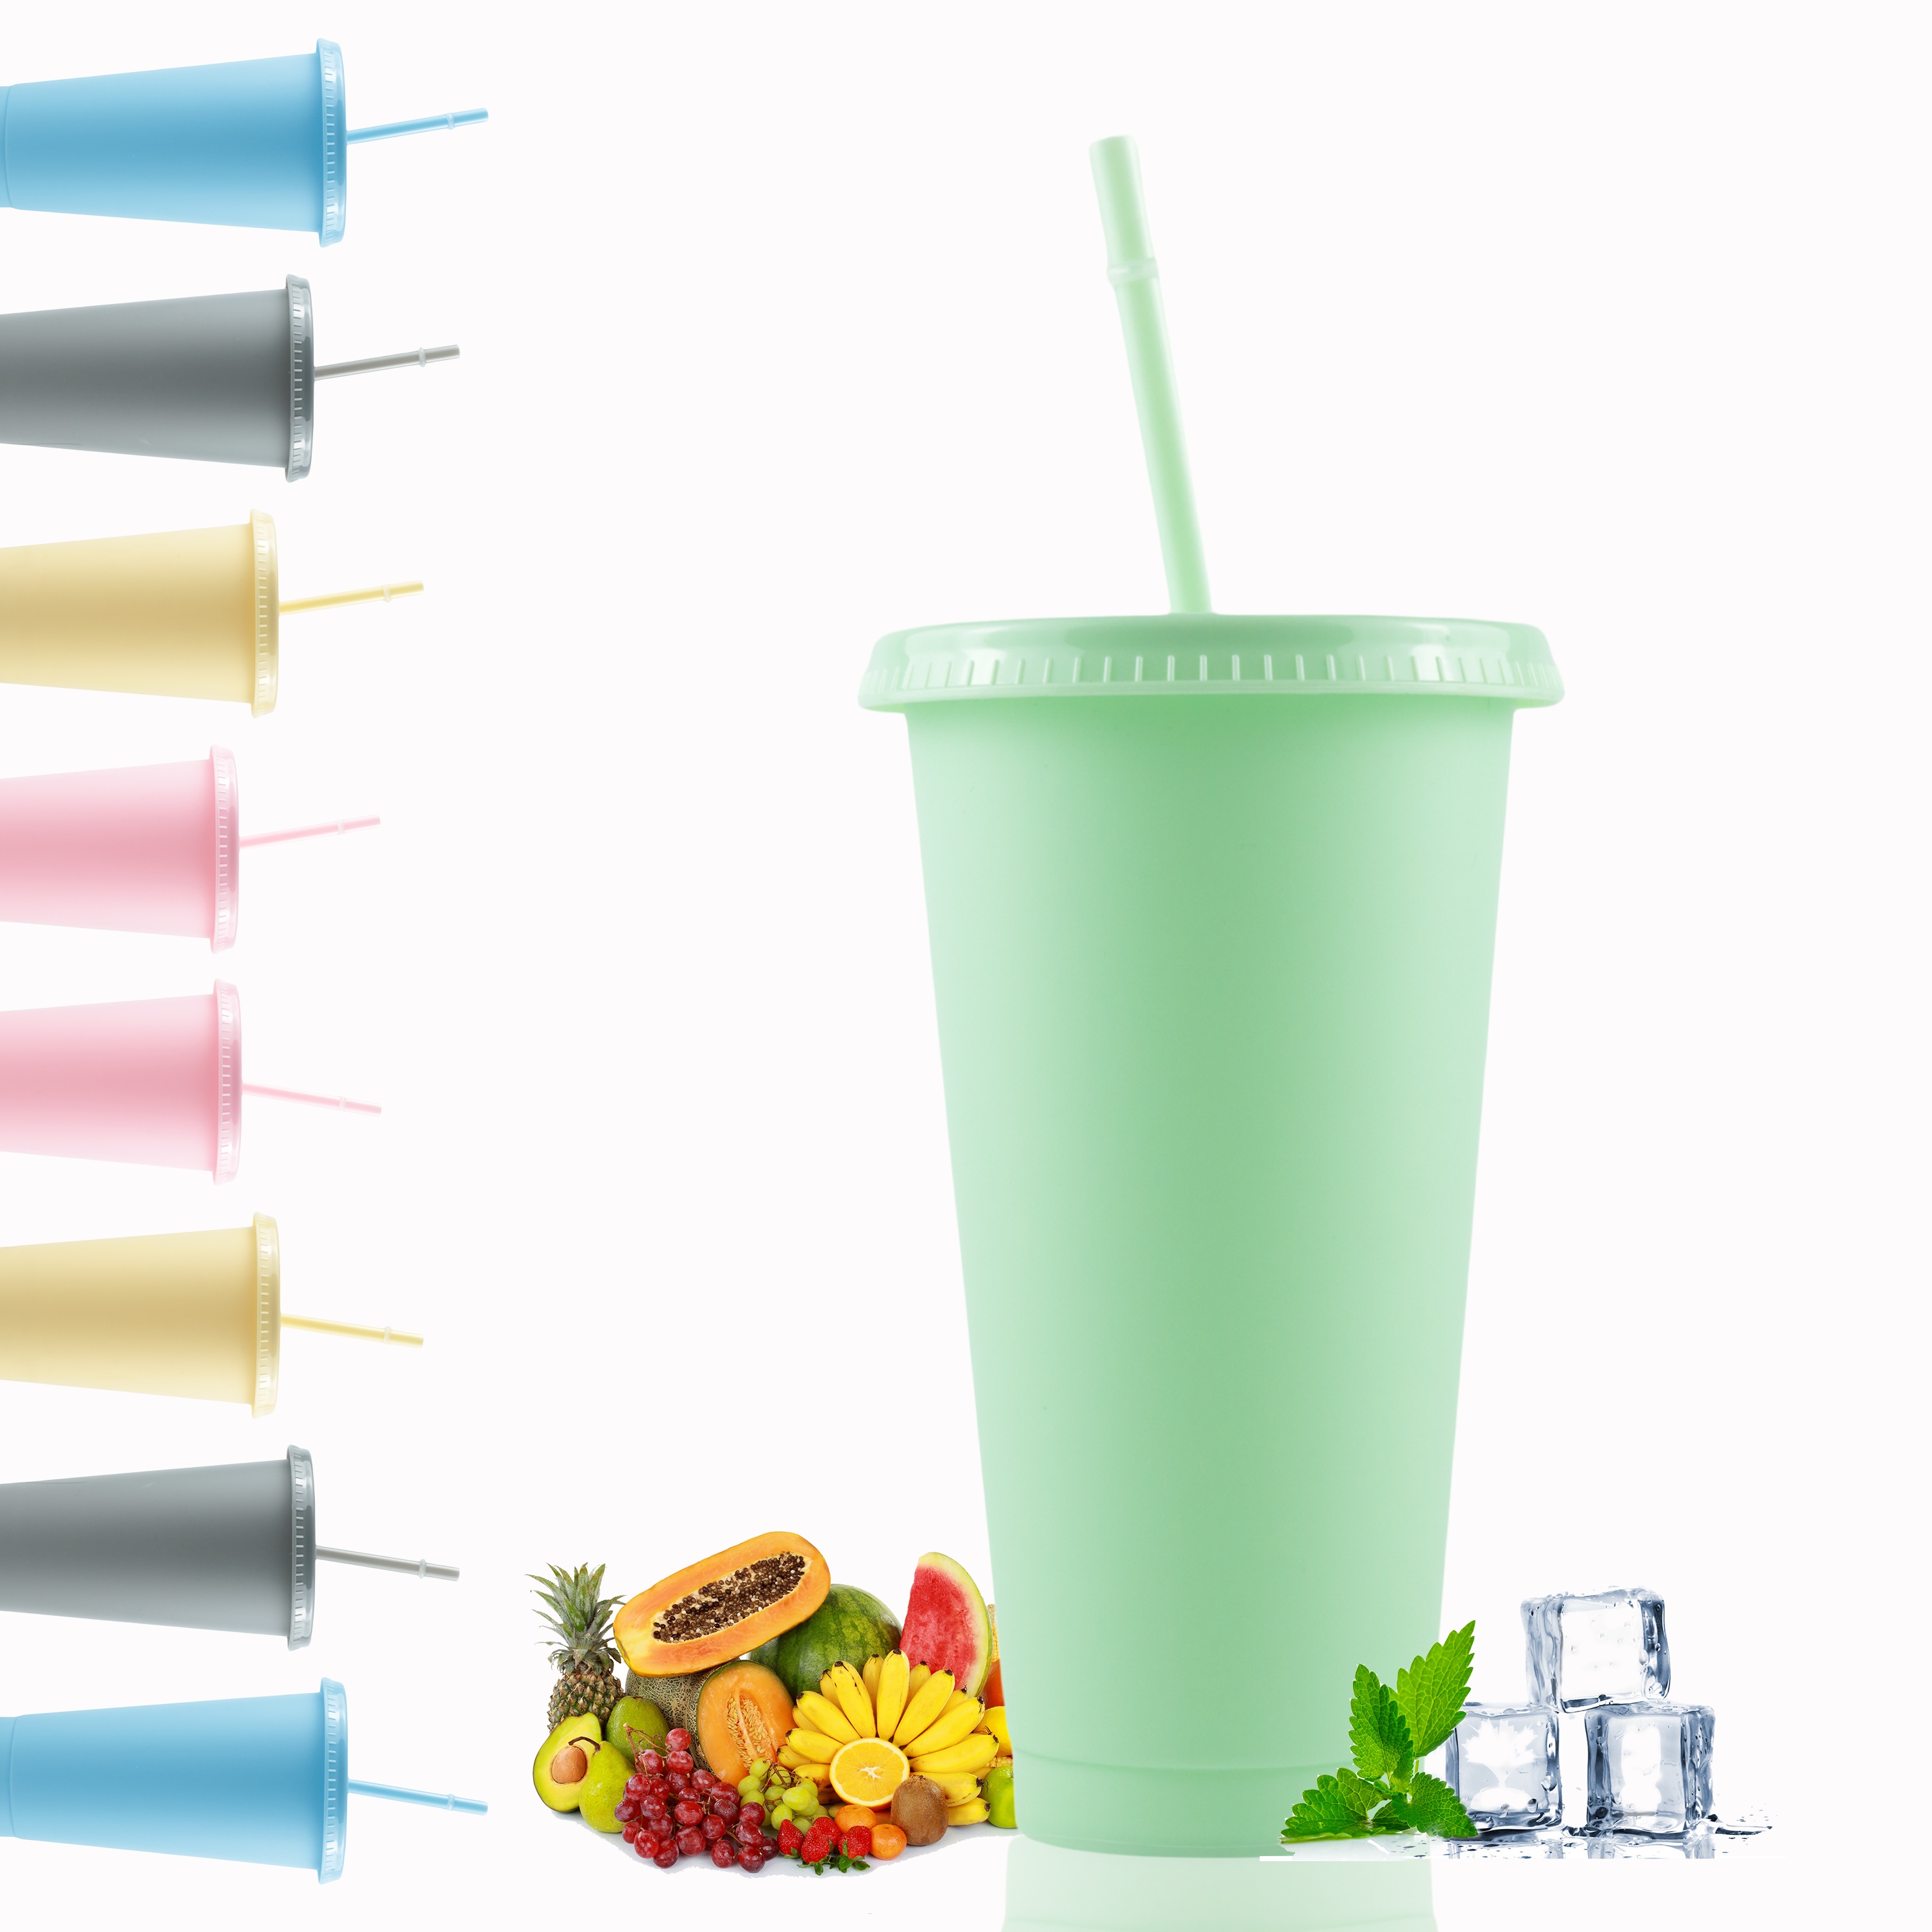 

5pcs, 710ml Reusable Party Drinking Cups With Straws & Lids - Water Bottle Iced Coffee Travel Cups Cold Drink Cups Smoothie Cup, Perfect For Parties, Birthdays